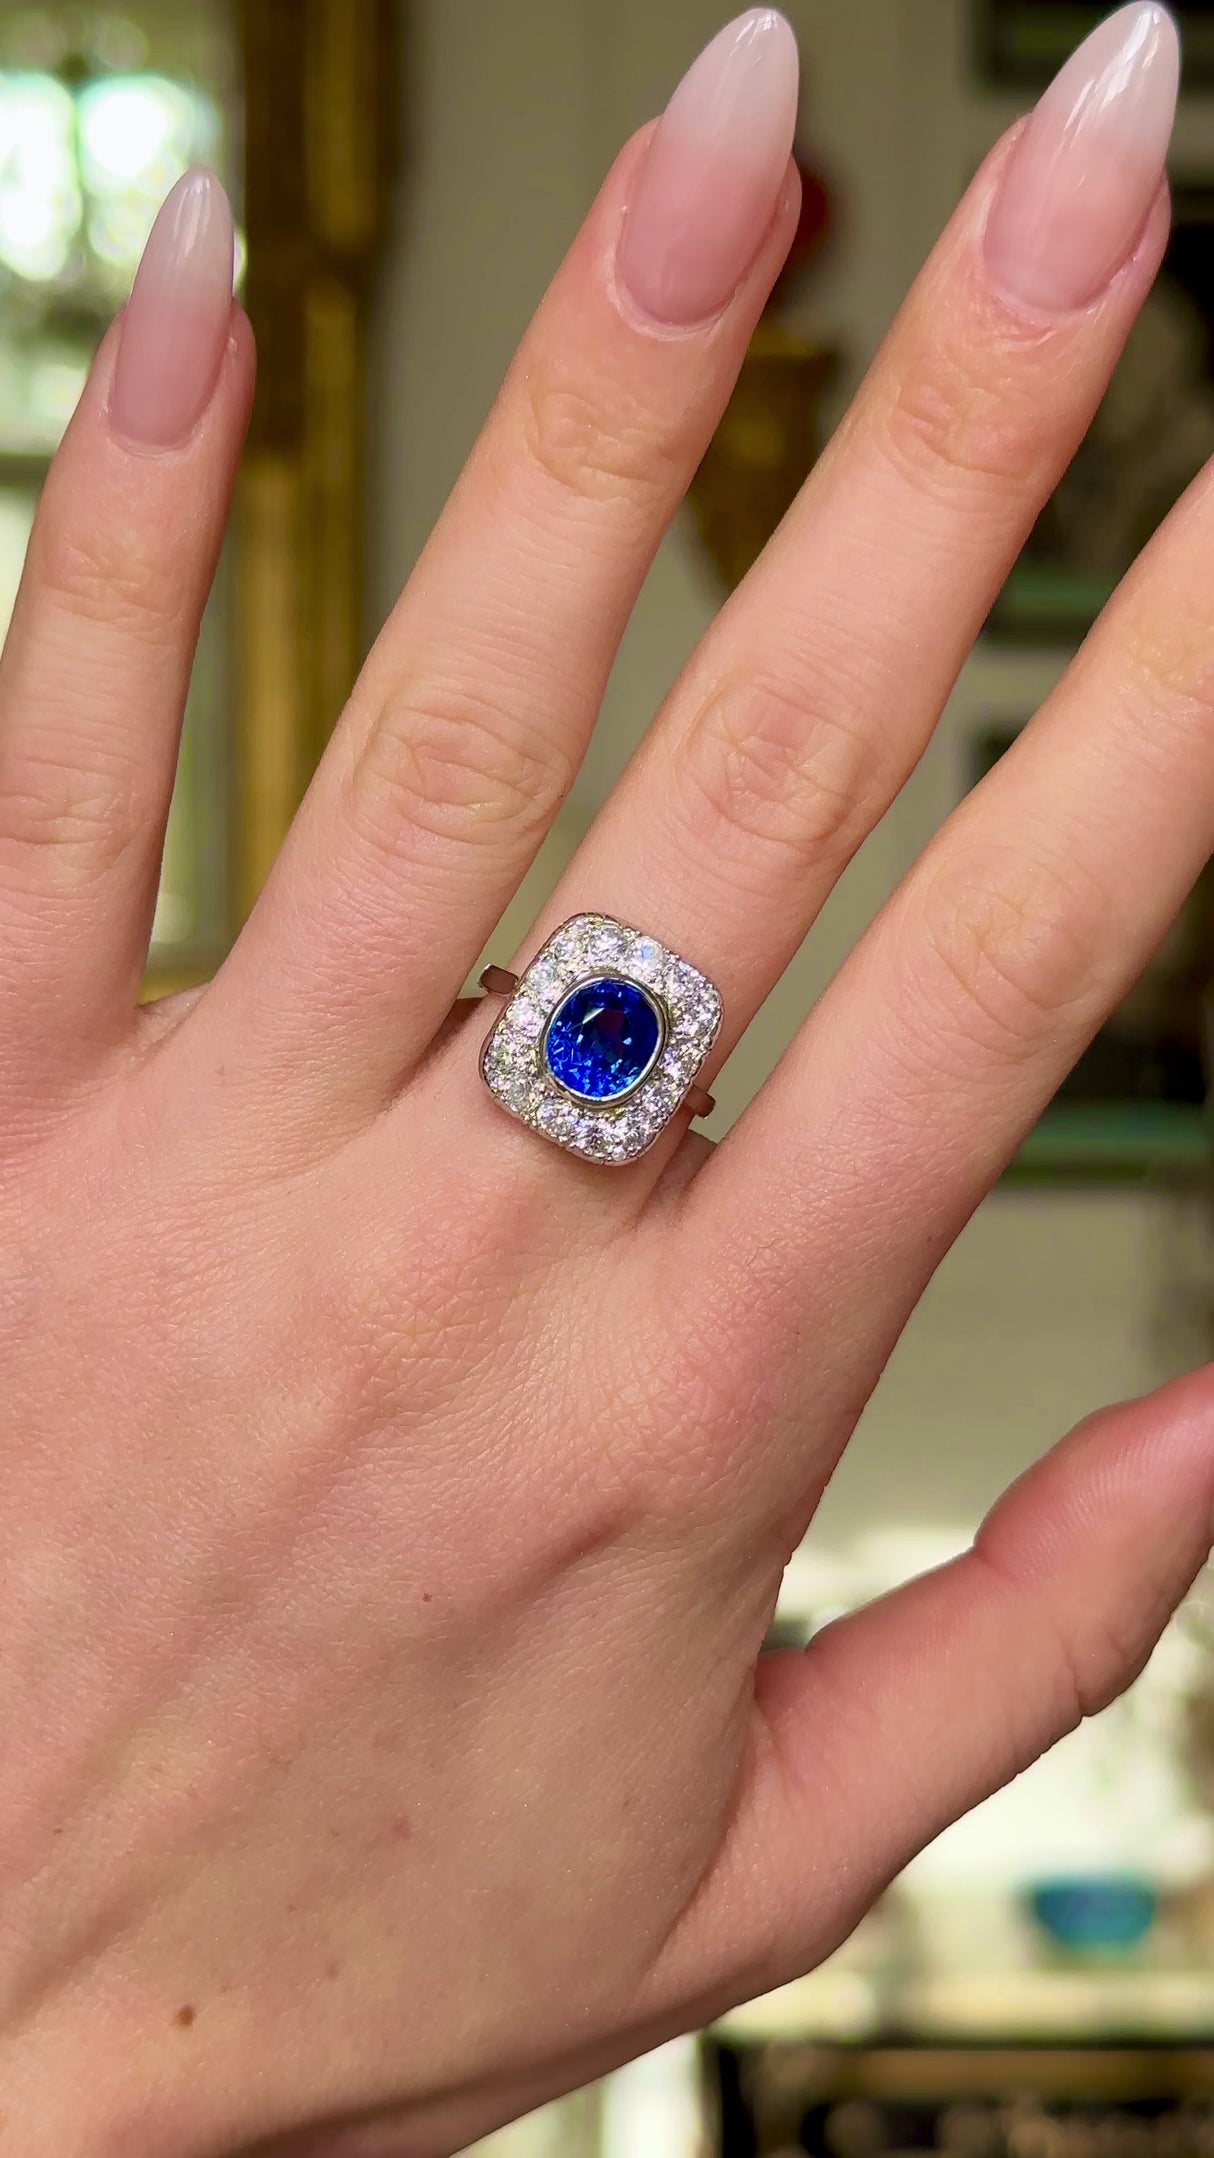 Art Deco sapphire and diamond cluster ring, worn on hand and moved around to give perspective.